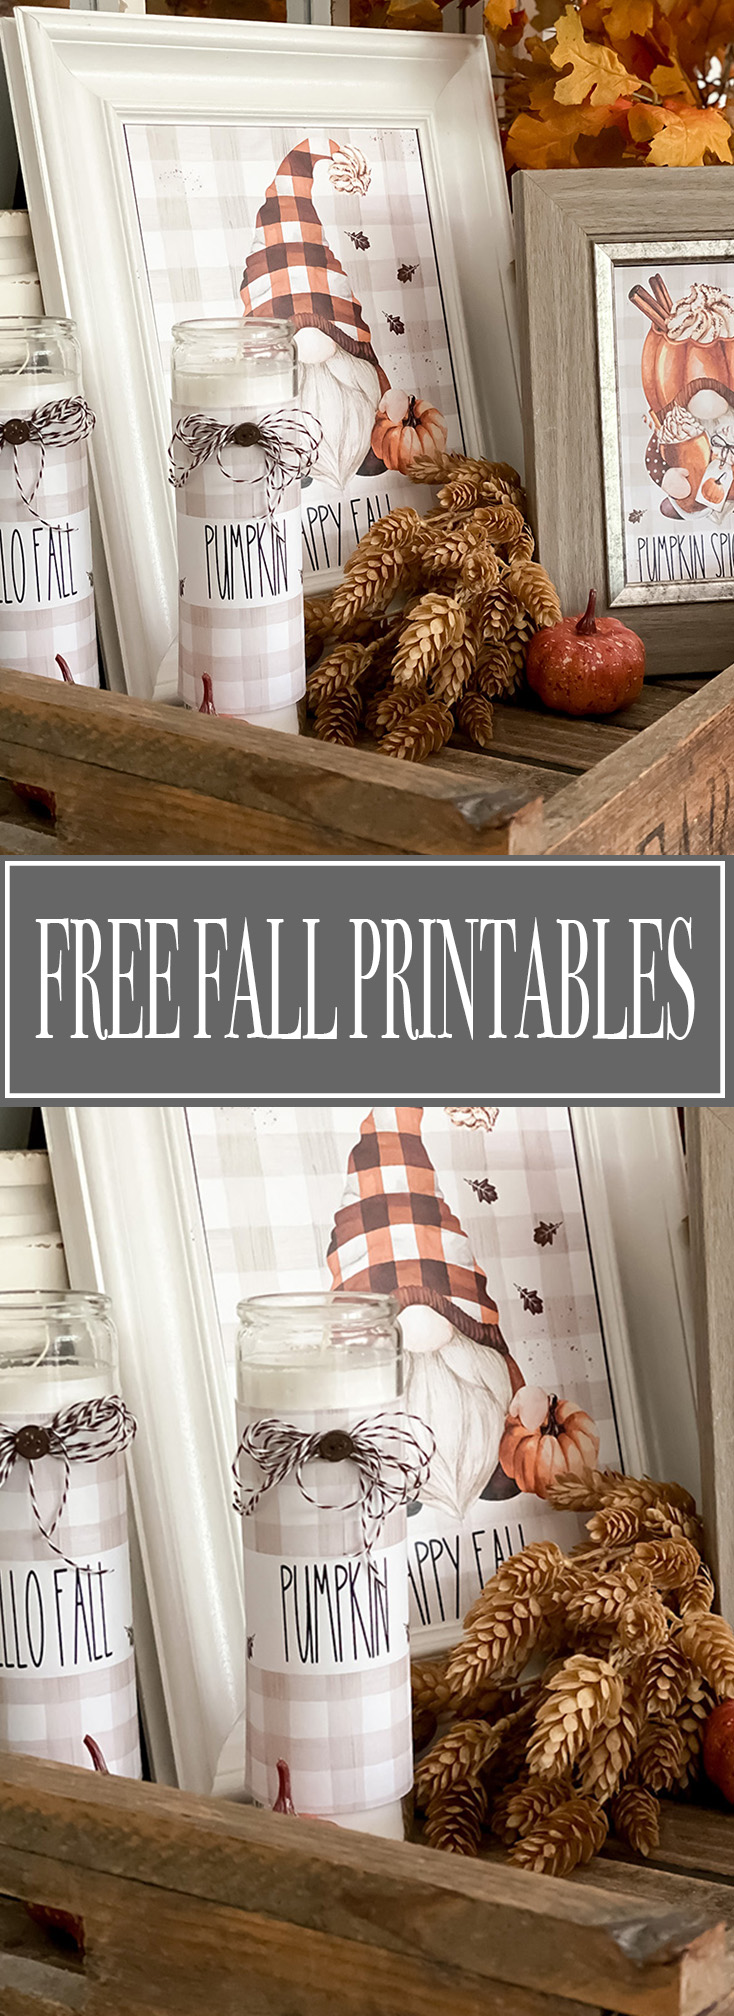 FREE AUGUST PRINTABLE COLLECTION - FALL PRINTABLES